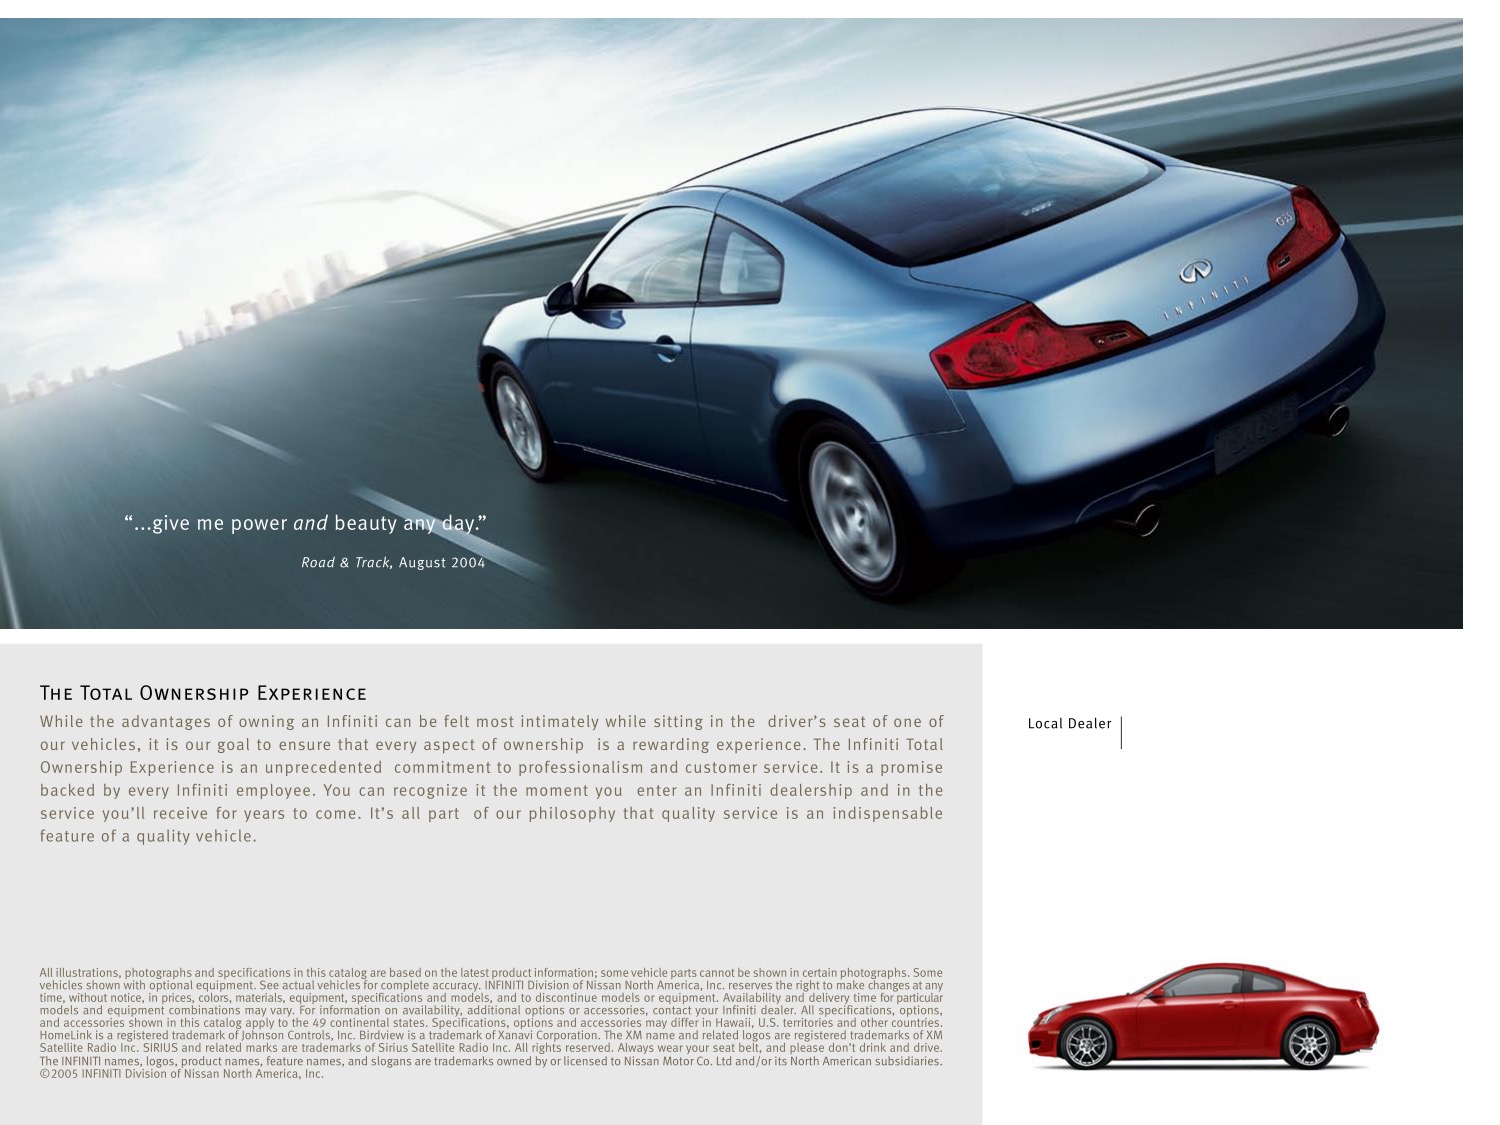 2006 Infiniti G Coupe Brochure Page 2